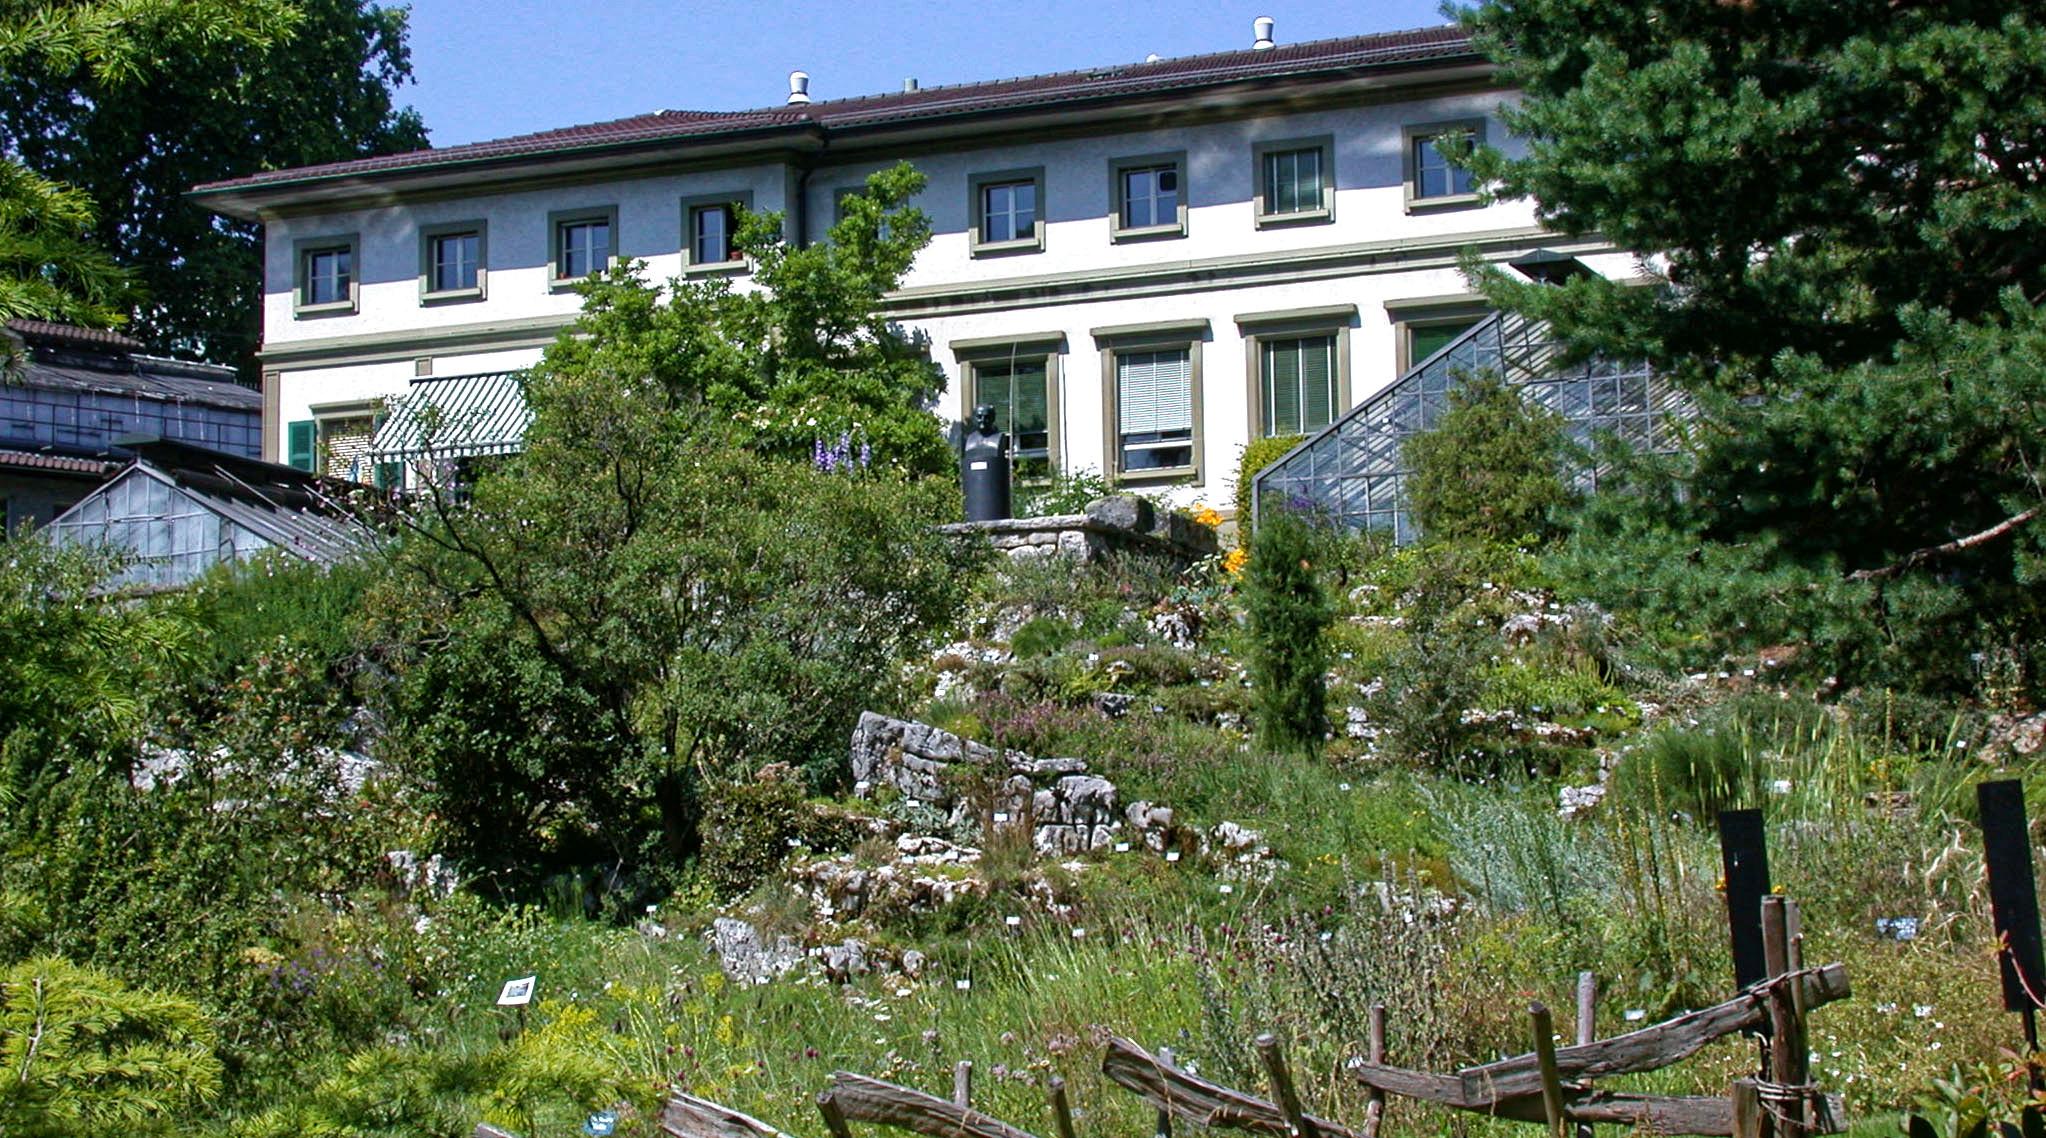 The Bern Botanical Garden: Places to Visit in Bern